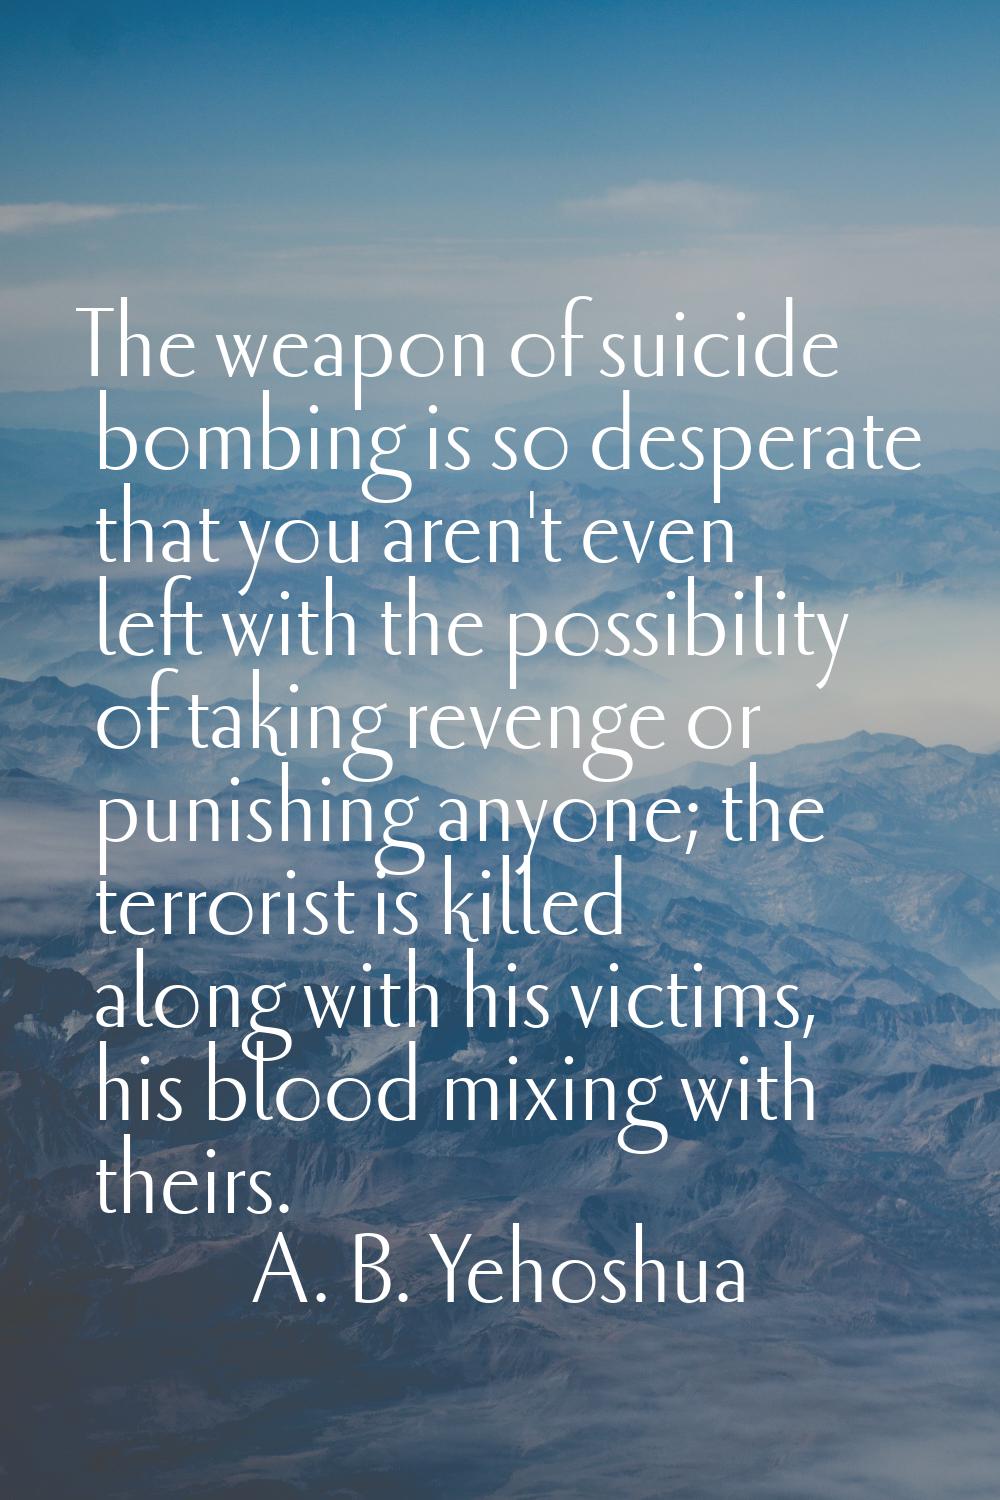 The weapon of suicide bombing is so desperate that you aren't even left with the possibility of tak